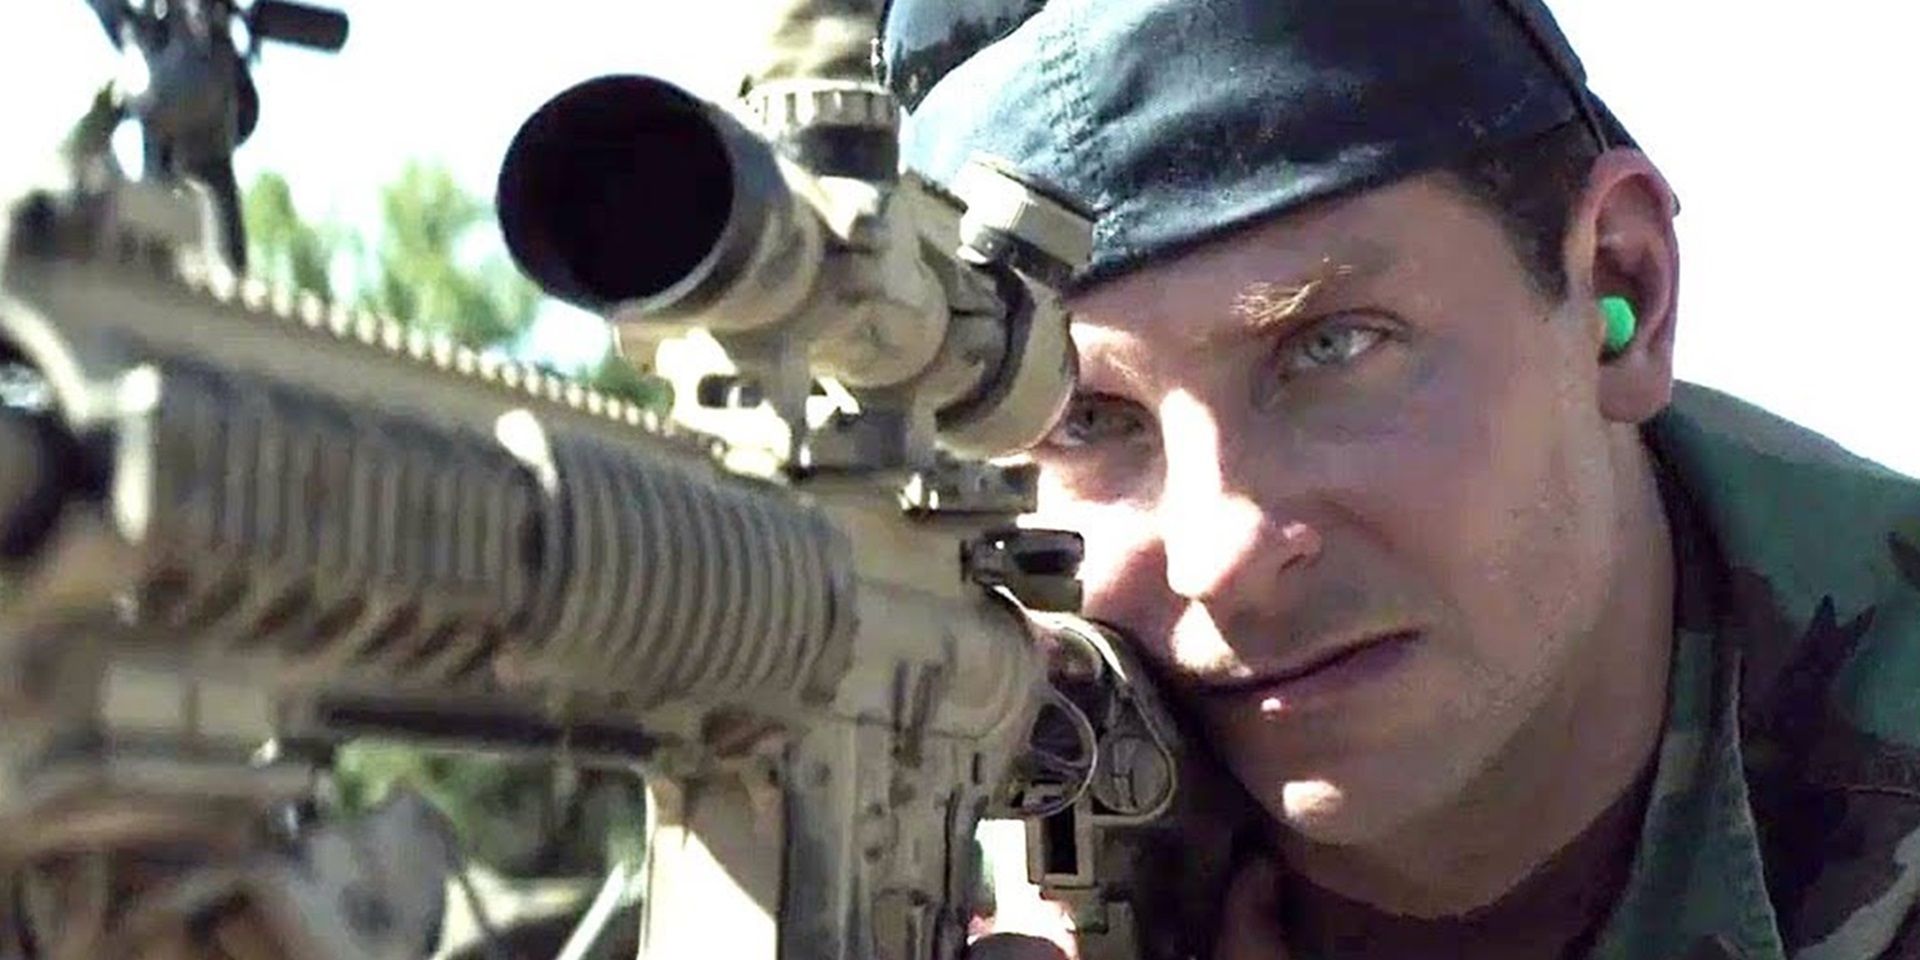 Chris at weapons training in American Sniper